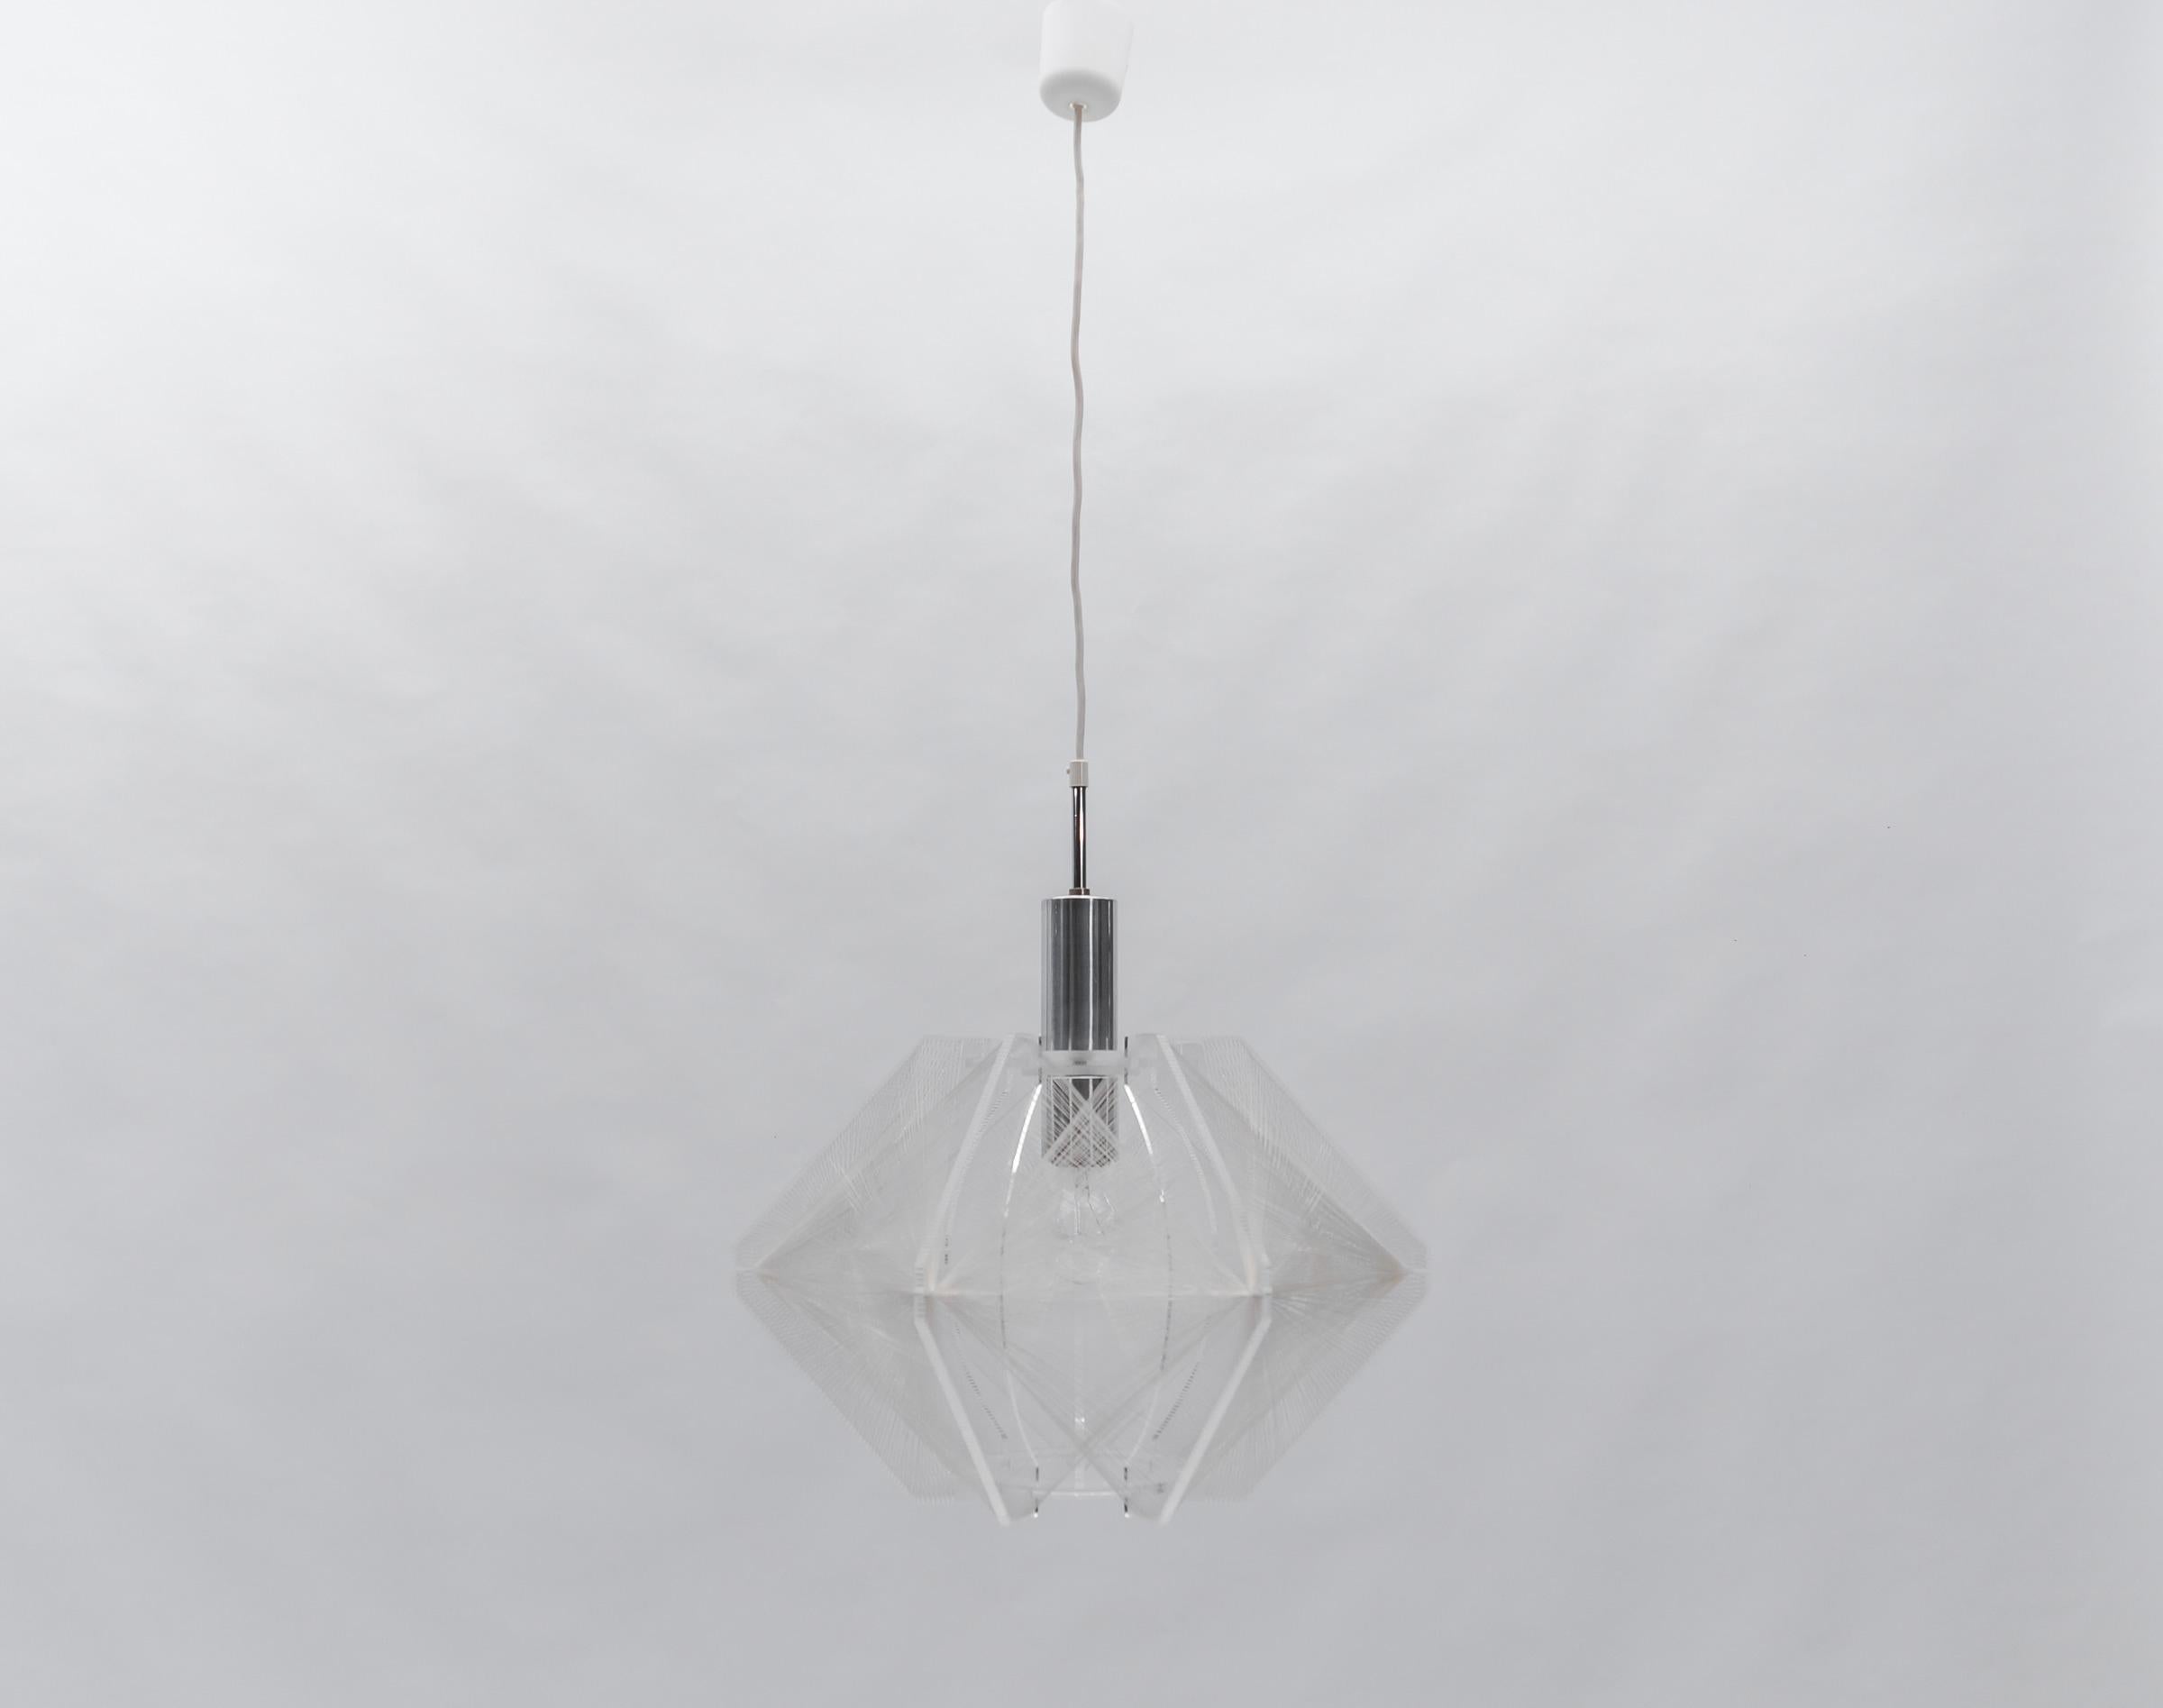 The lamp can be adjusted from 60-95 cm in height.

The pendant lamp comes with 1 x E27 / E26 Edison screw fit bulb holder, is wired and in working condition. It runs both on 110/230 Volt. Delivery without bulbs.

Our lamps are checked, cleaned and